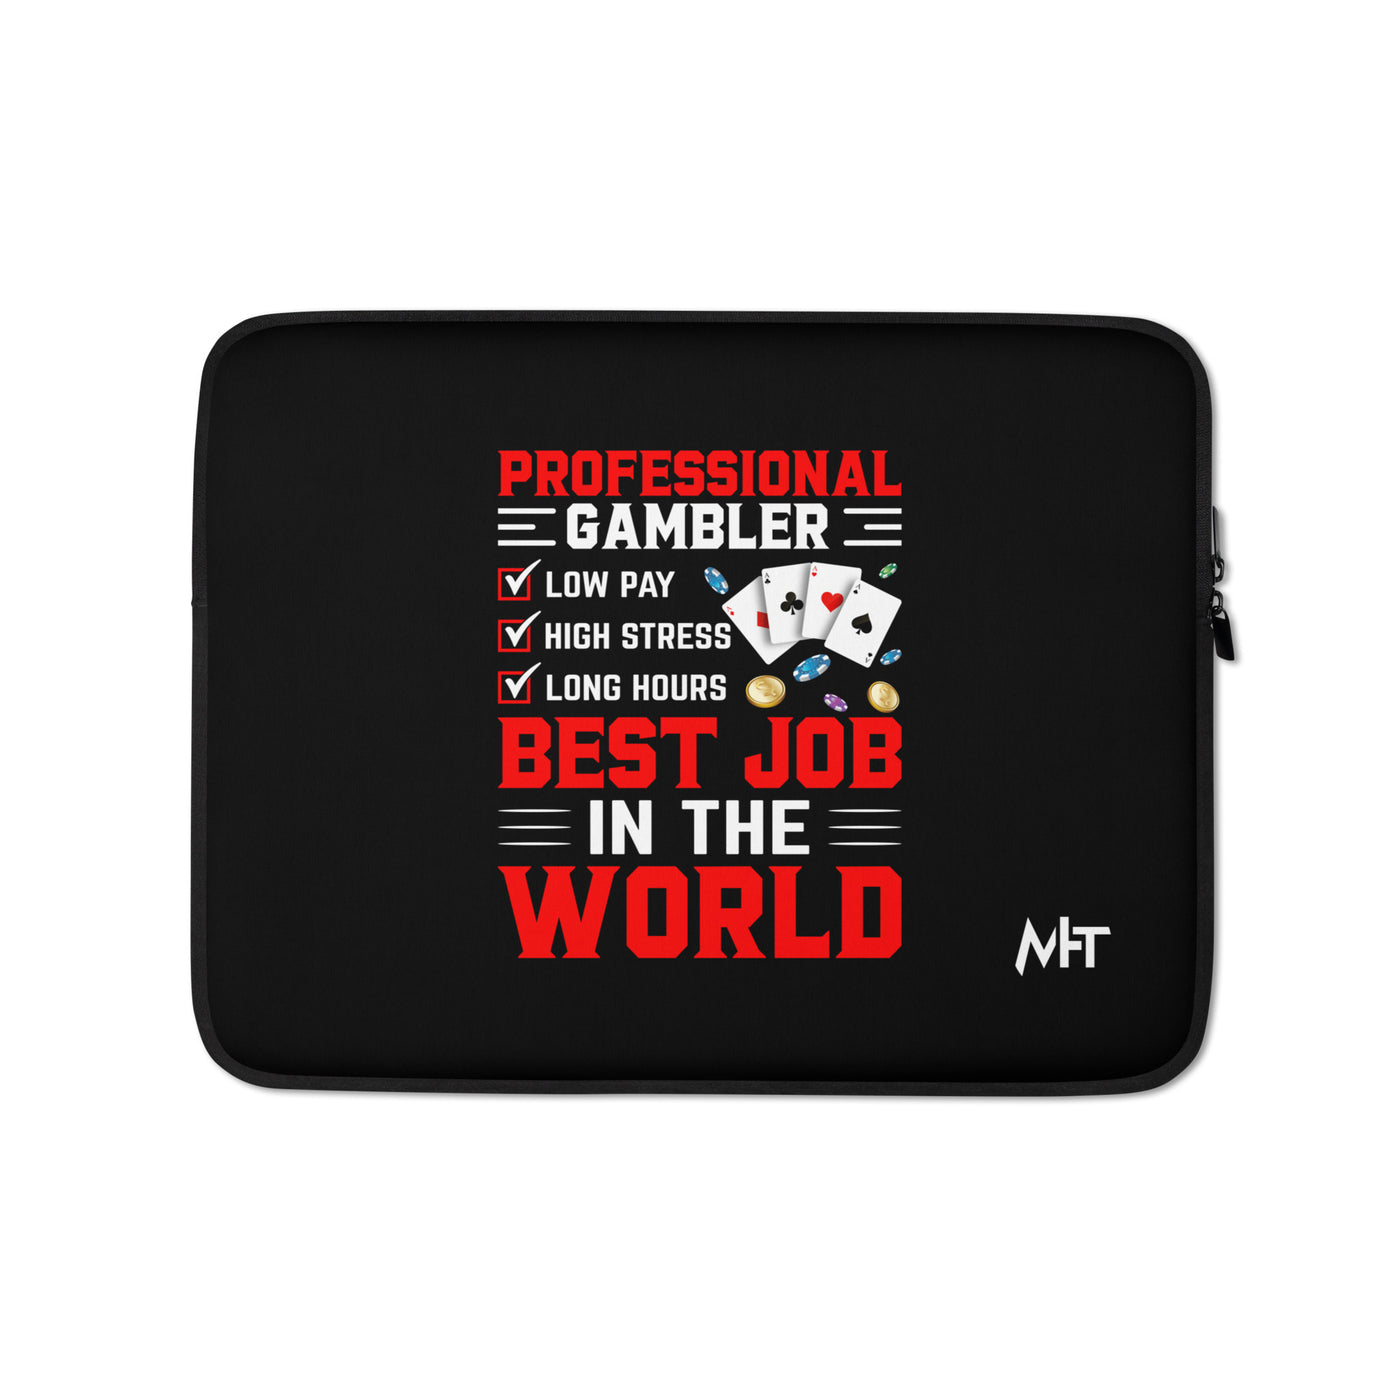 Professional Gambler: The Best Job in the World - Laptop Sleeve